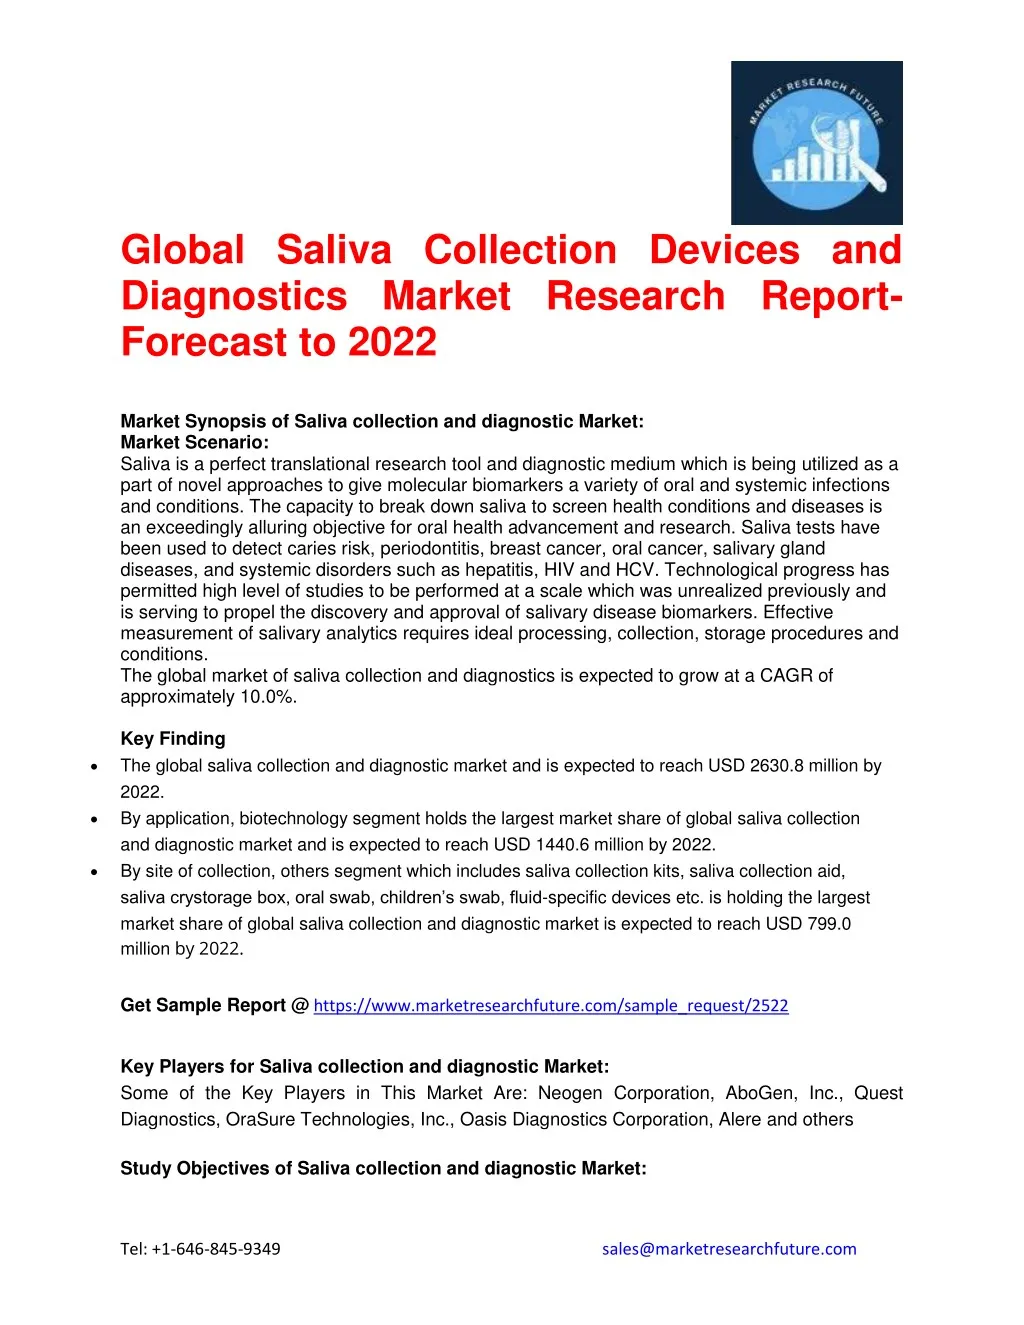 global saliva collection devices and diagnostics